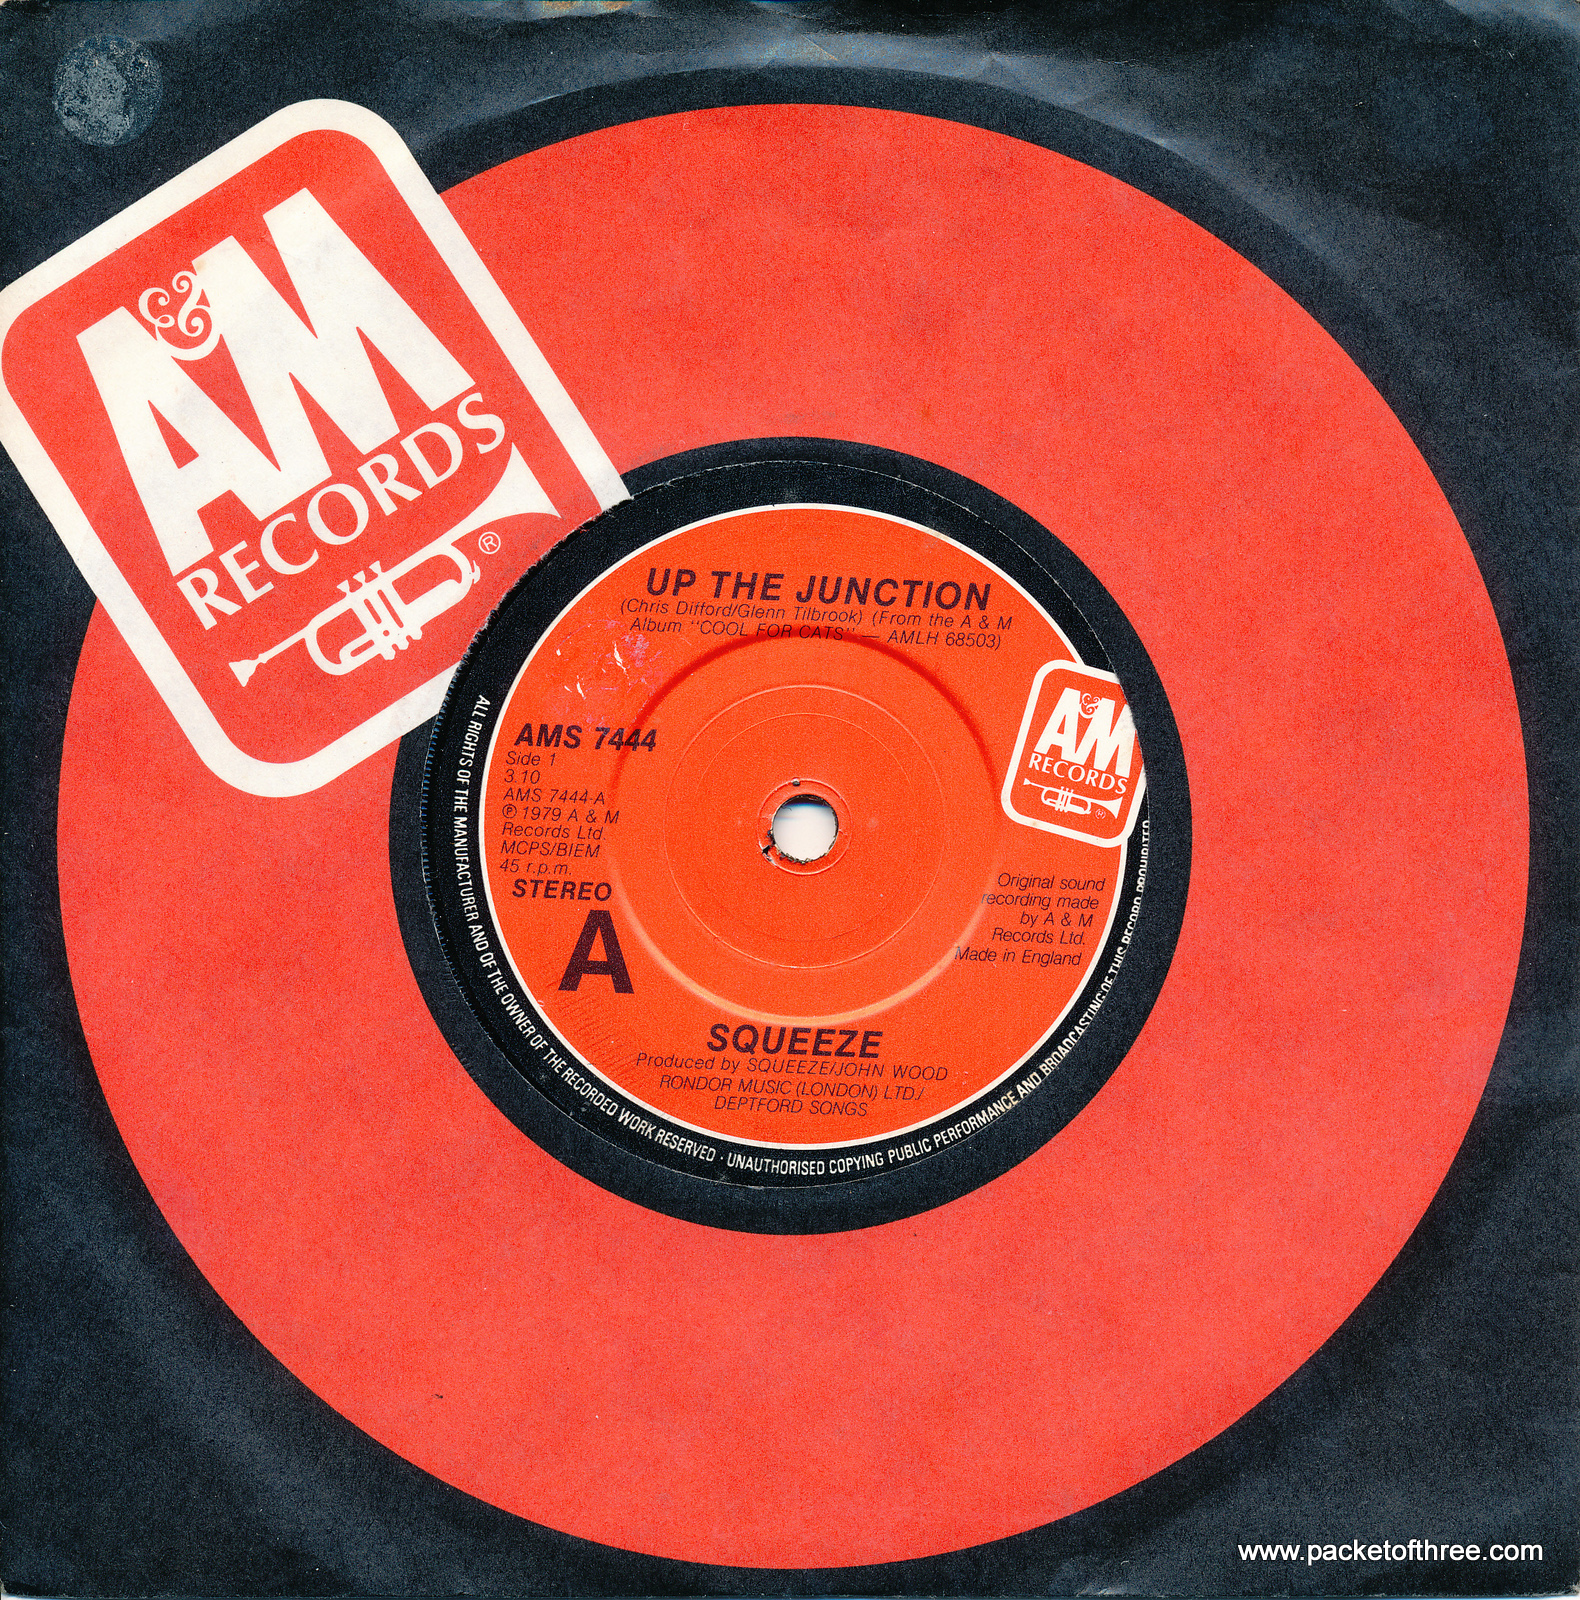 Up the Junction - UK - 7" - red label